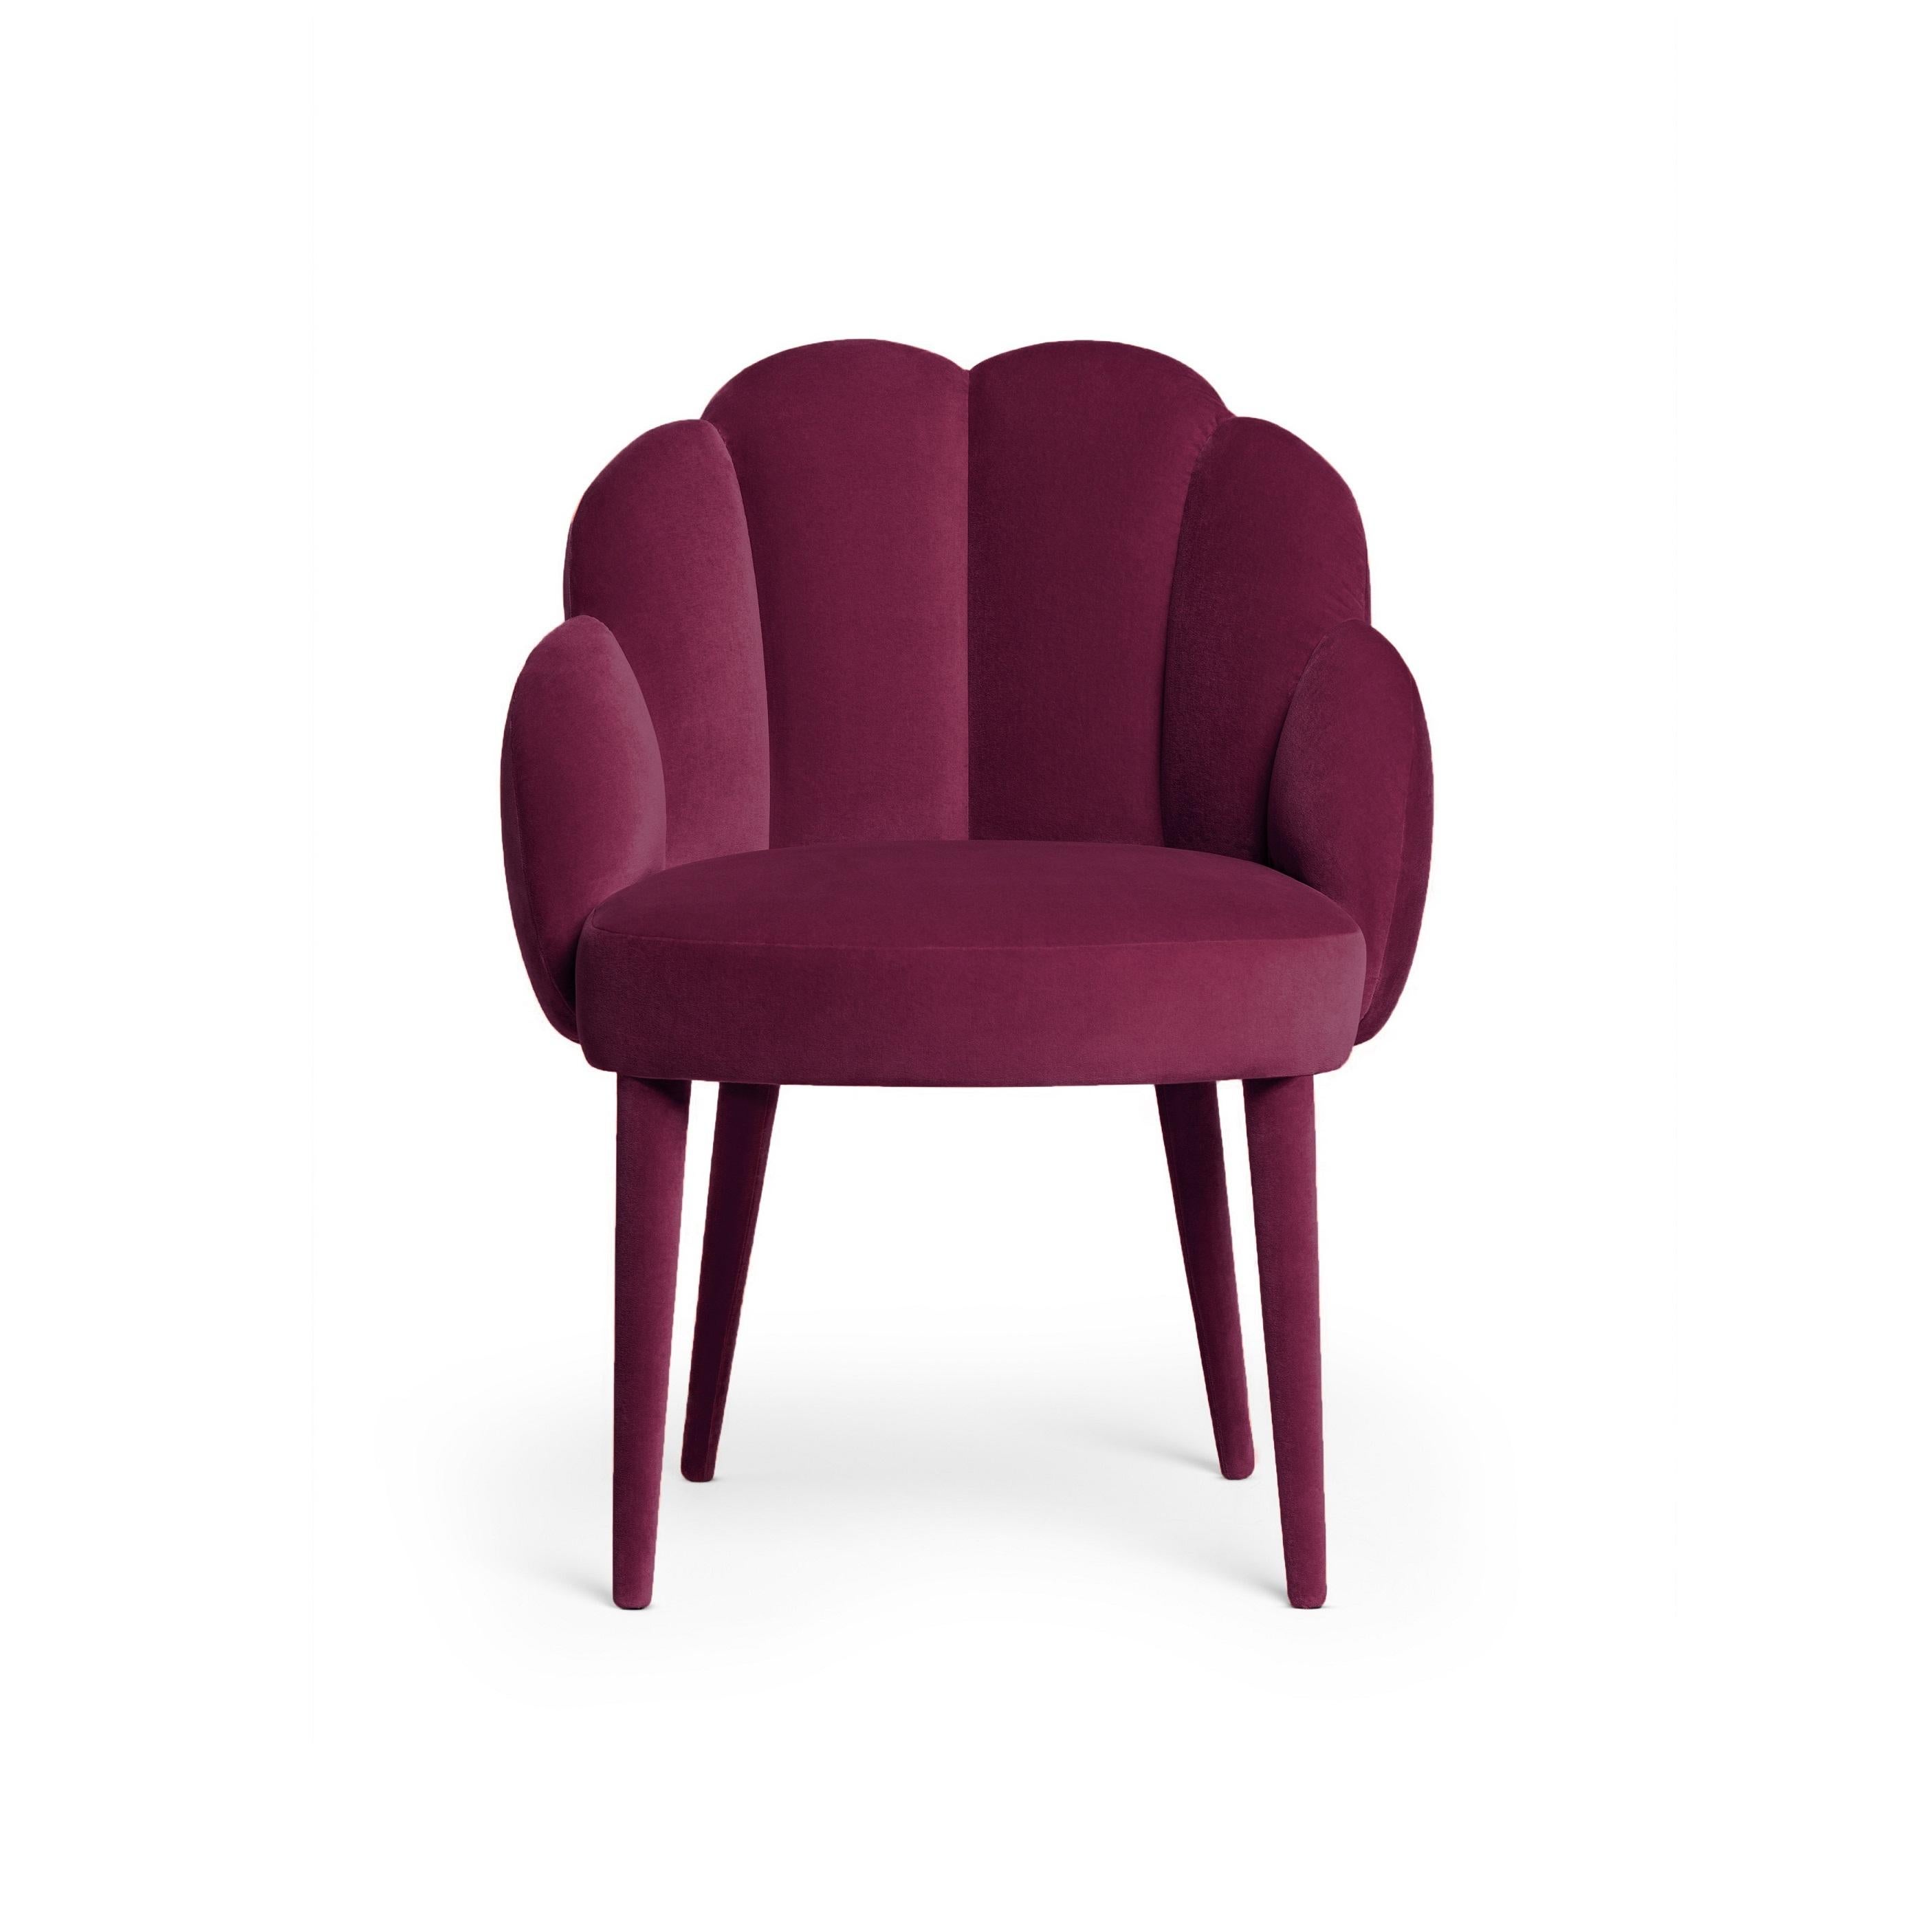 Portuguese Contemporary Dining Chair Offered in Velvet For Sale